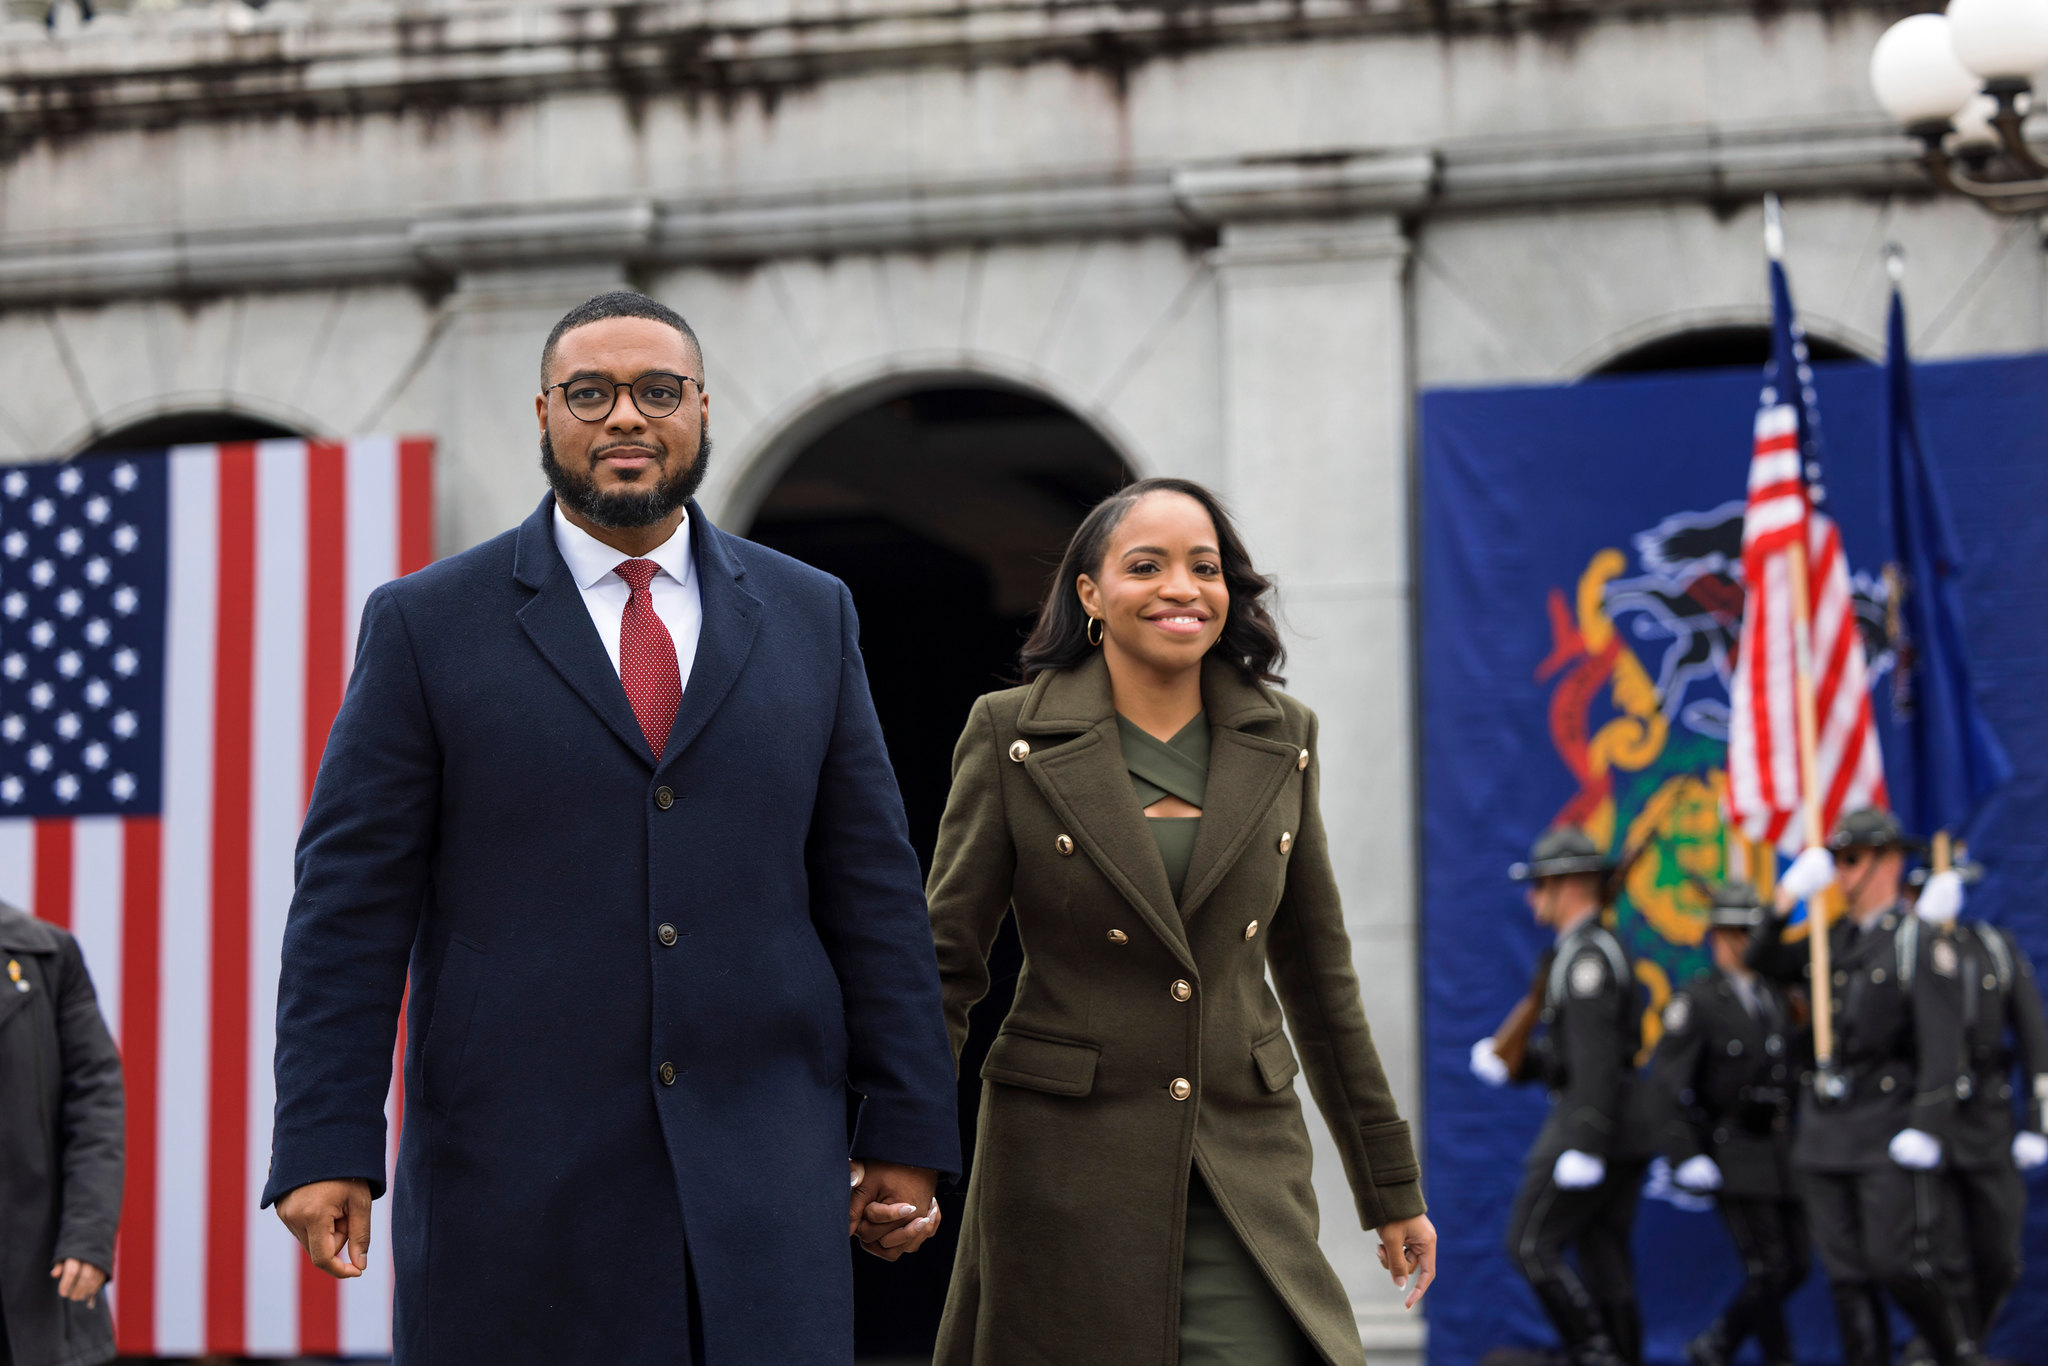 Lt. Governor and Second Lady walking.